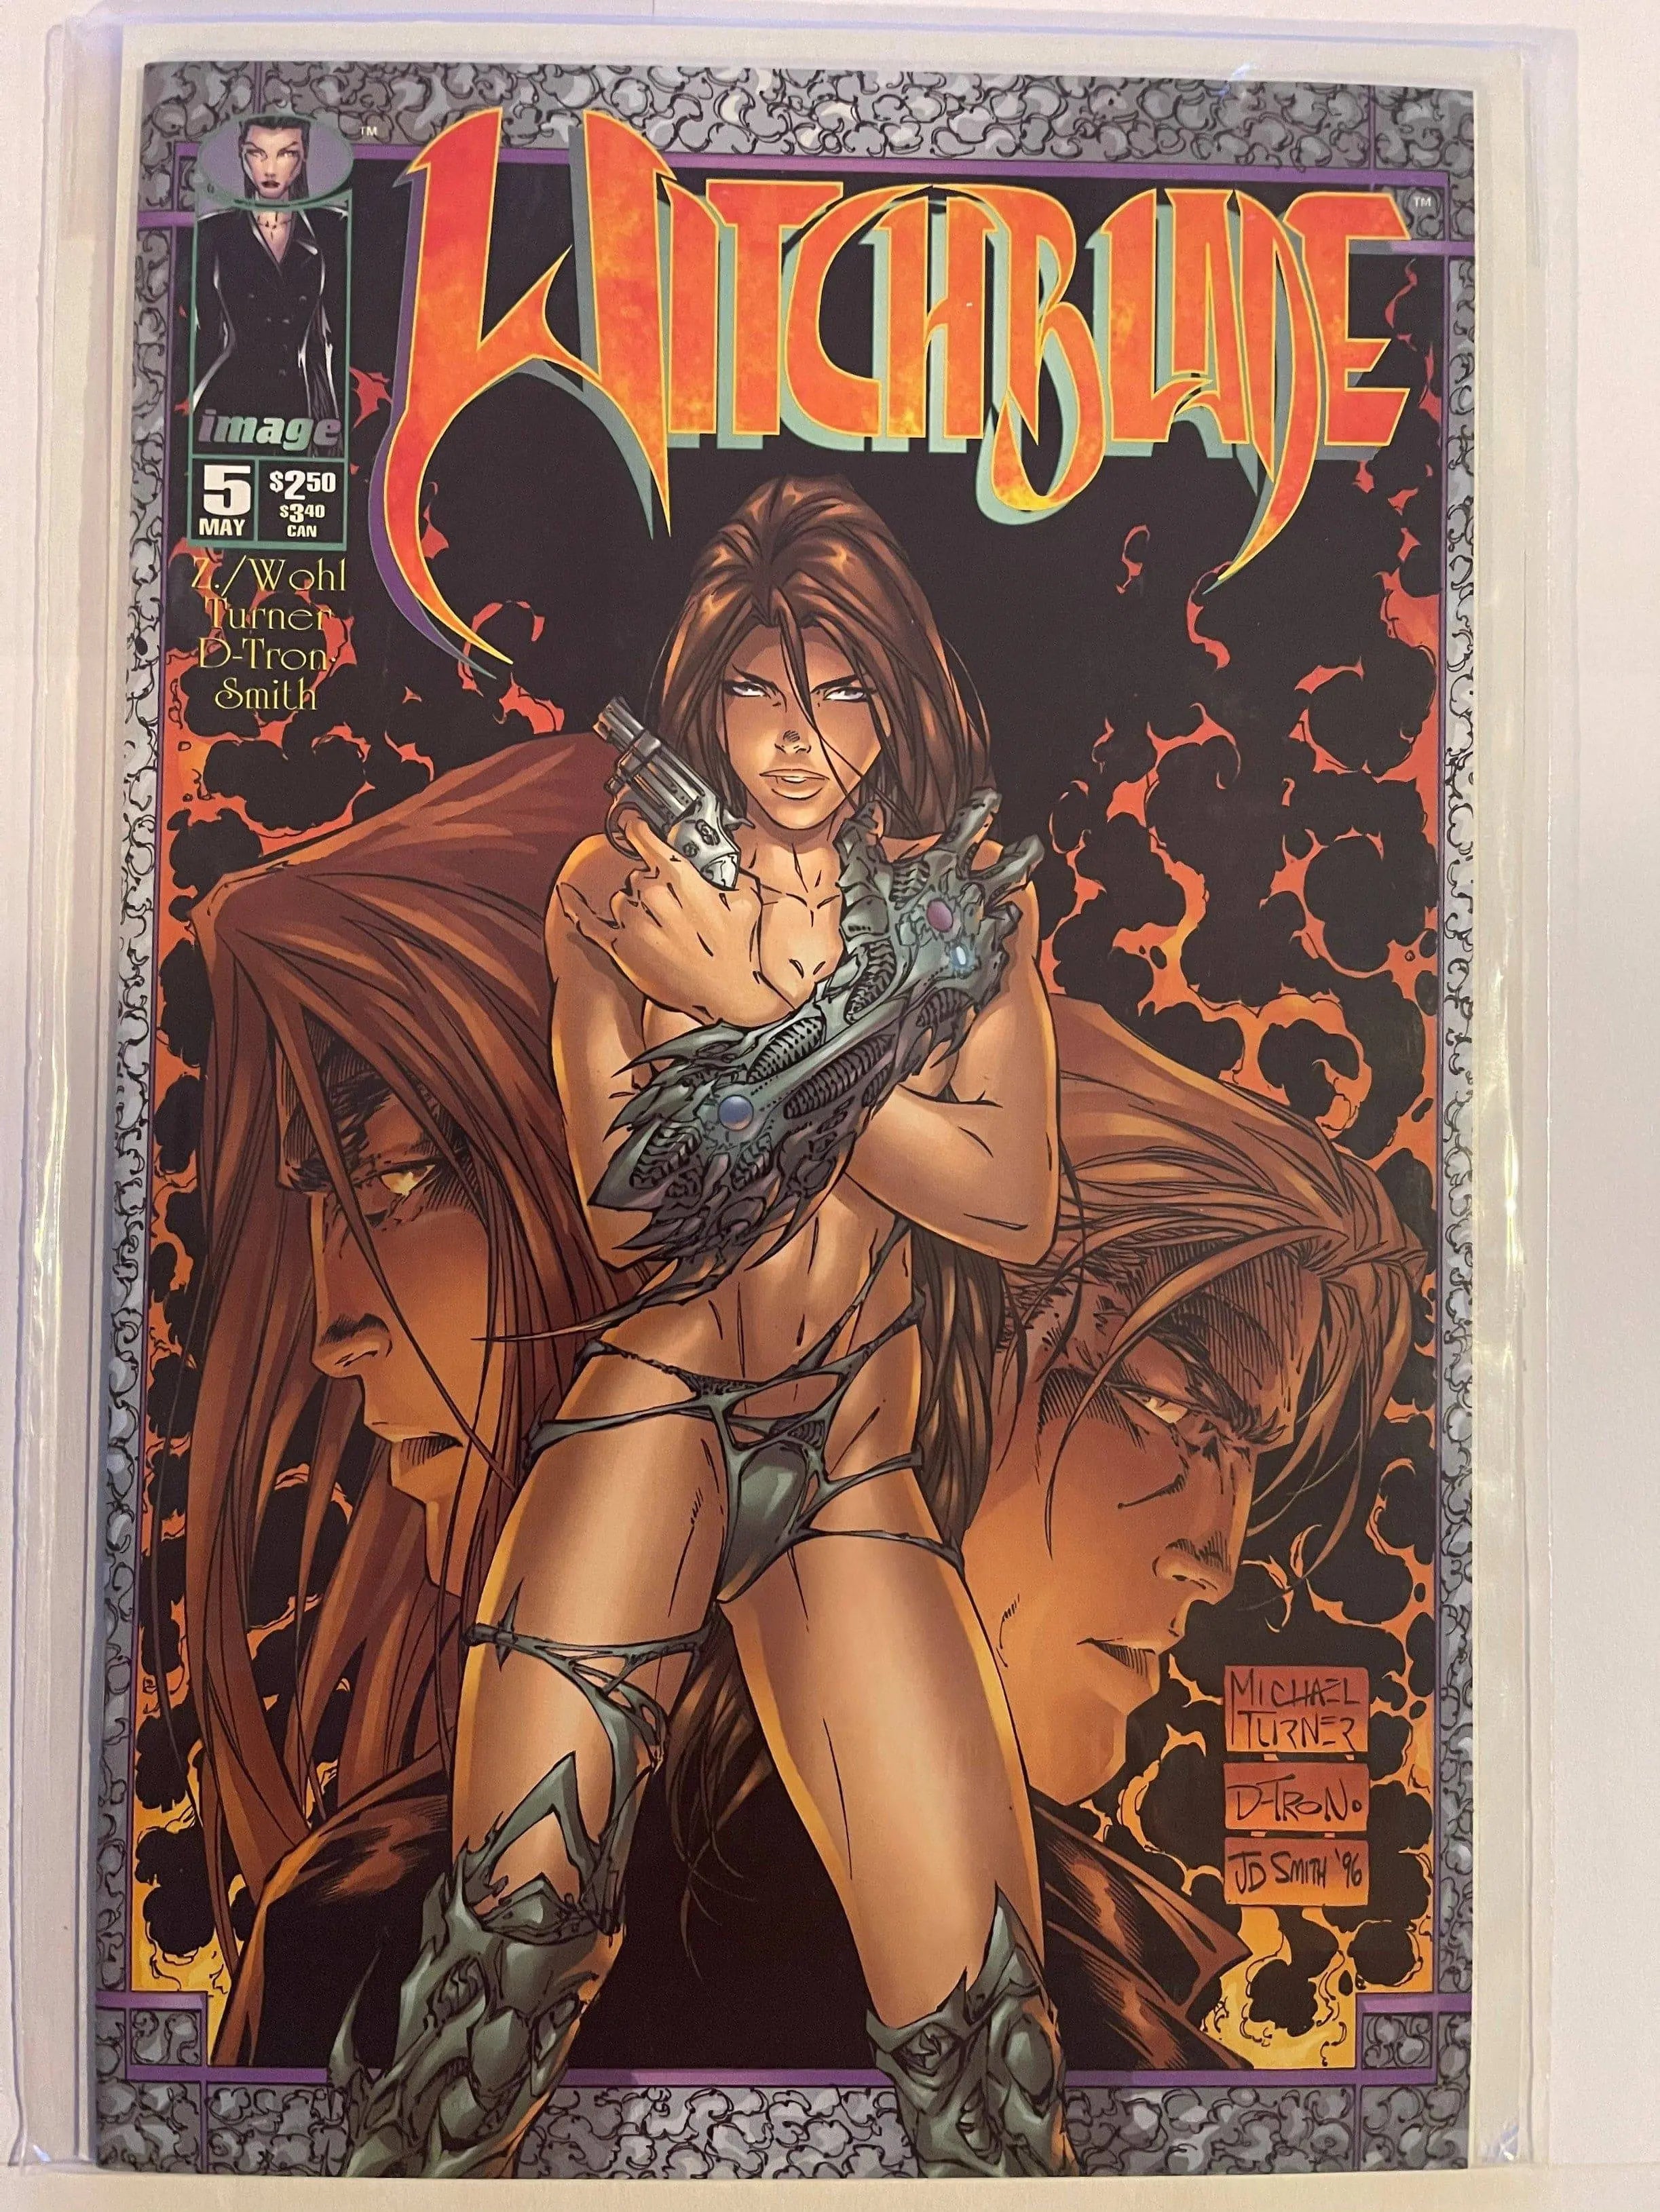 WitchBlade King Gaming Bundle - Used/Collector - Near Mint 9.0 or Above - Set #5 To #16 - #21 To #24 King Gaming